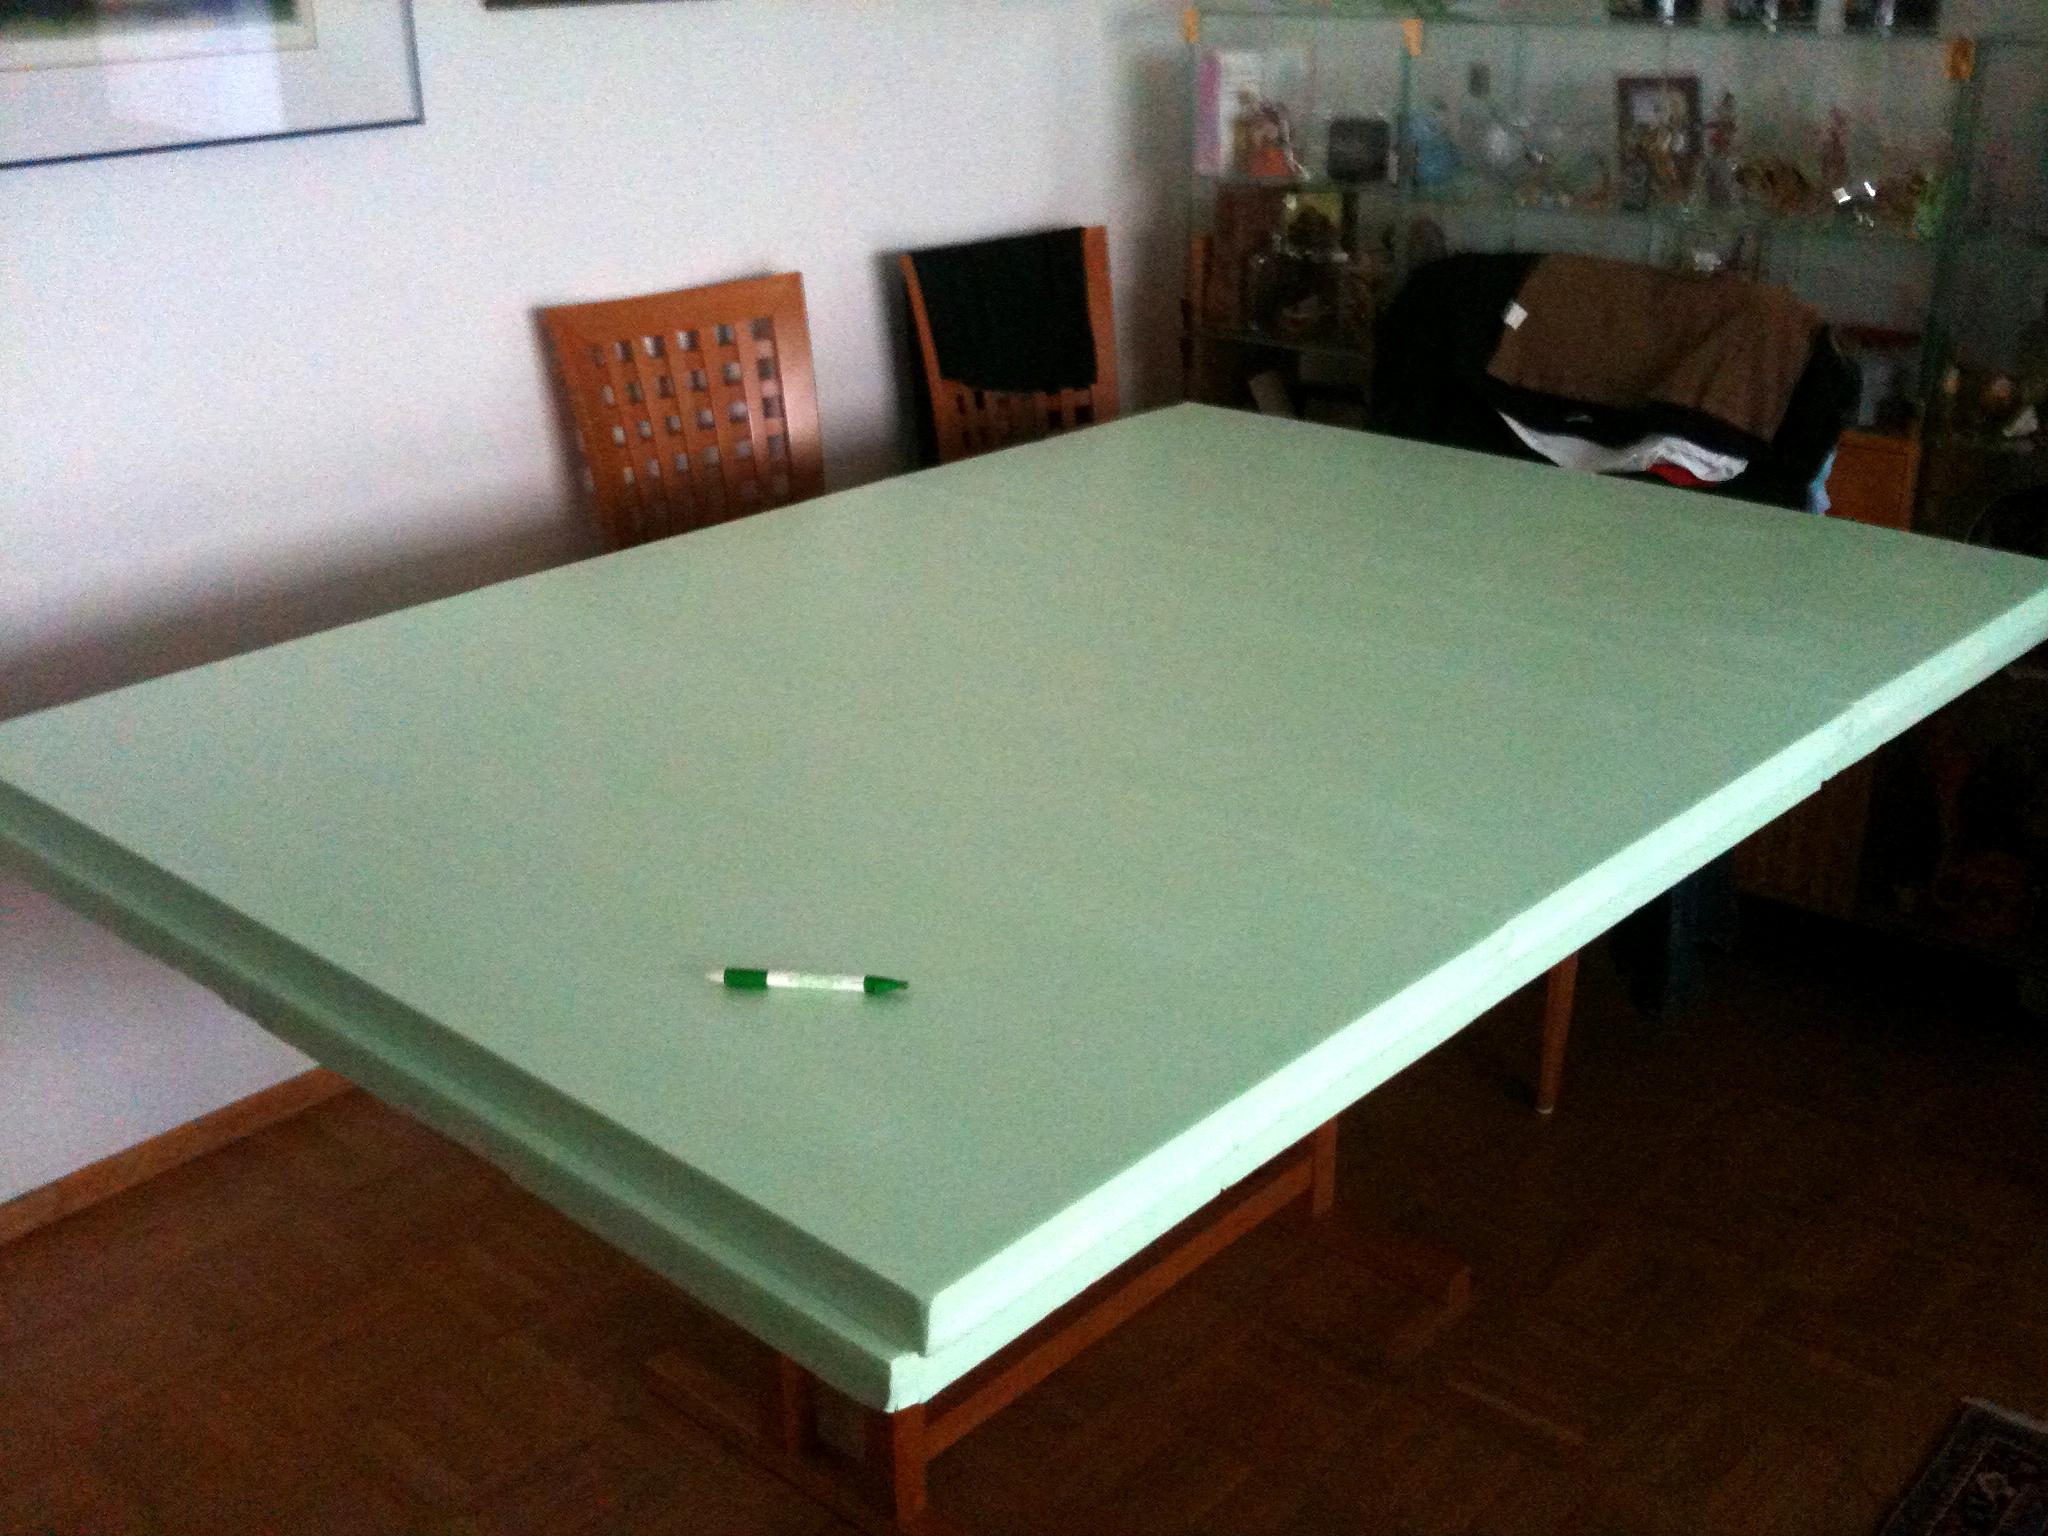 Disable, Game Table, Work In Progress